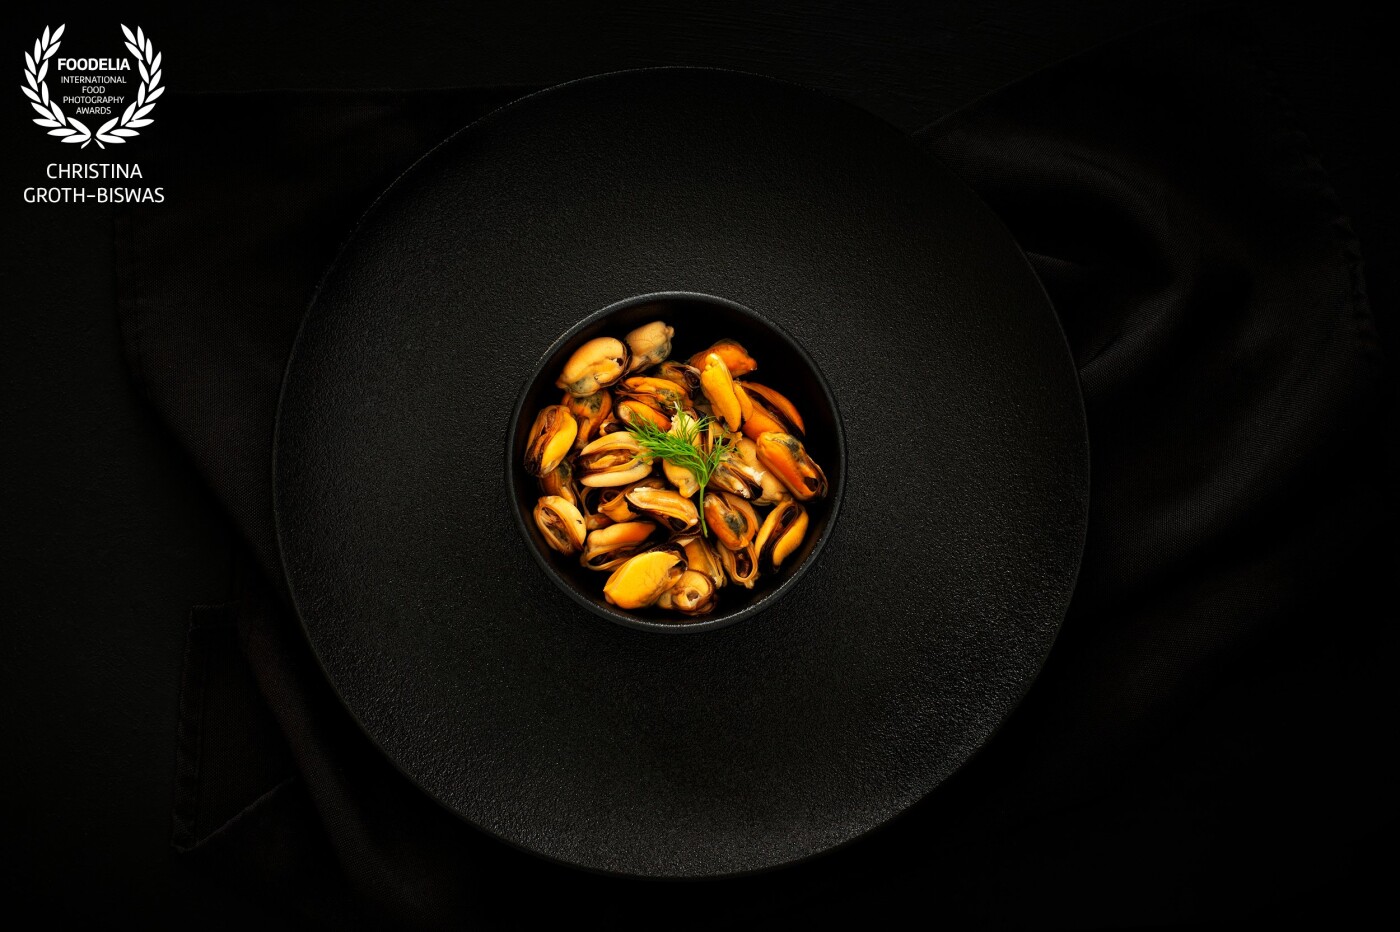 A bowl of cooked mussels on a simple black set up, which I believe enhances the beautiful almost golden colour of the mussels without adding additional distractions.